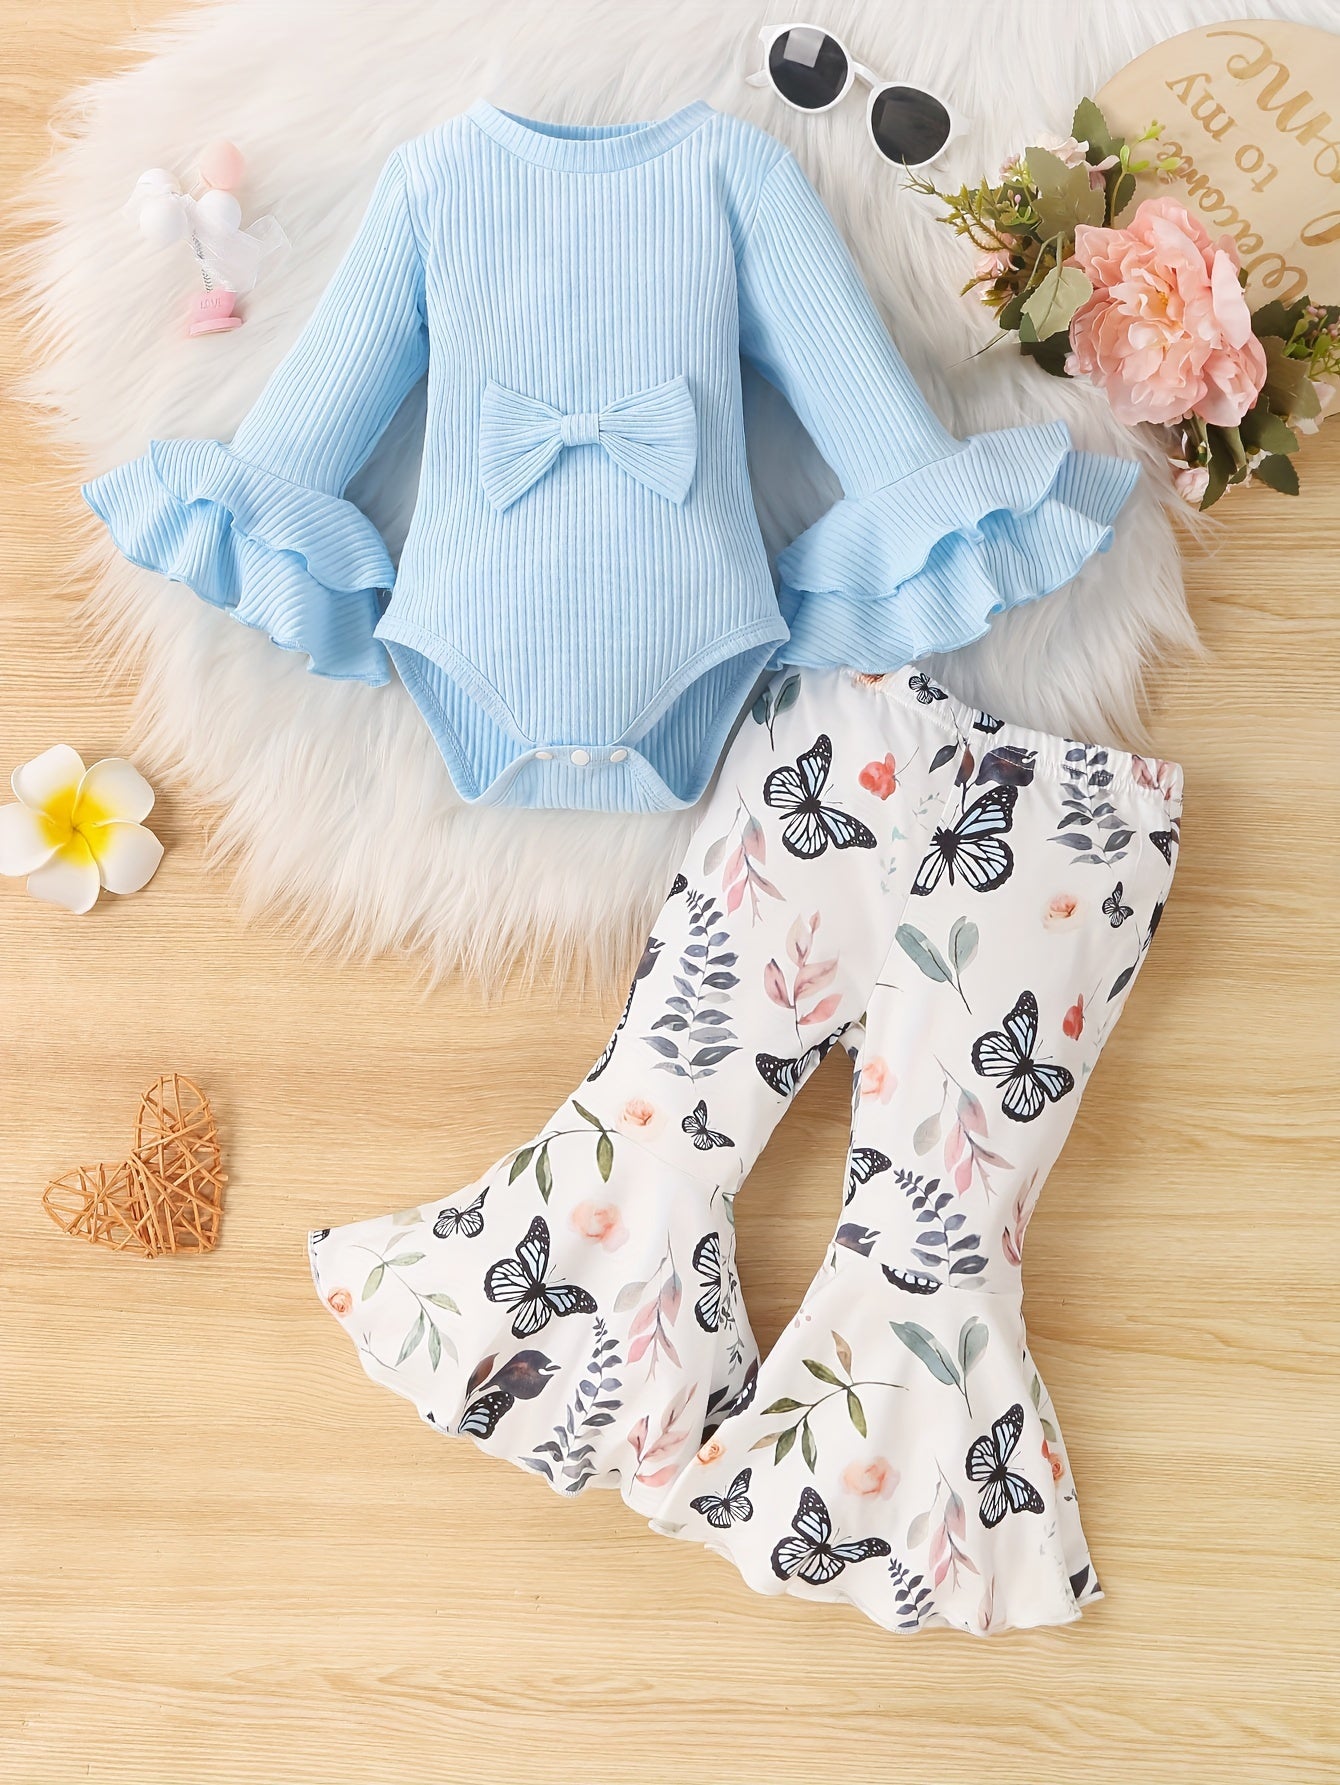 Baby Girl's Long Flared Sleeve Triangle Romper Top + Floral Print Flared Pants Set, Infant Fall Winter Outfit